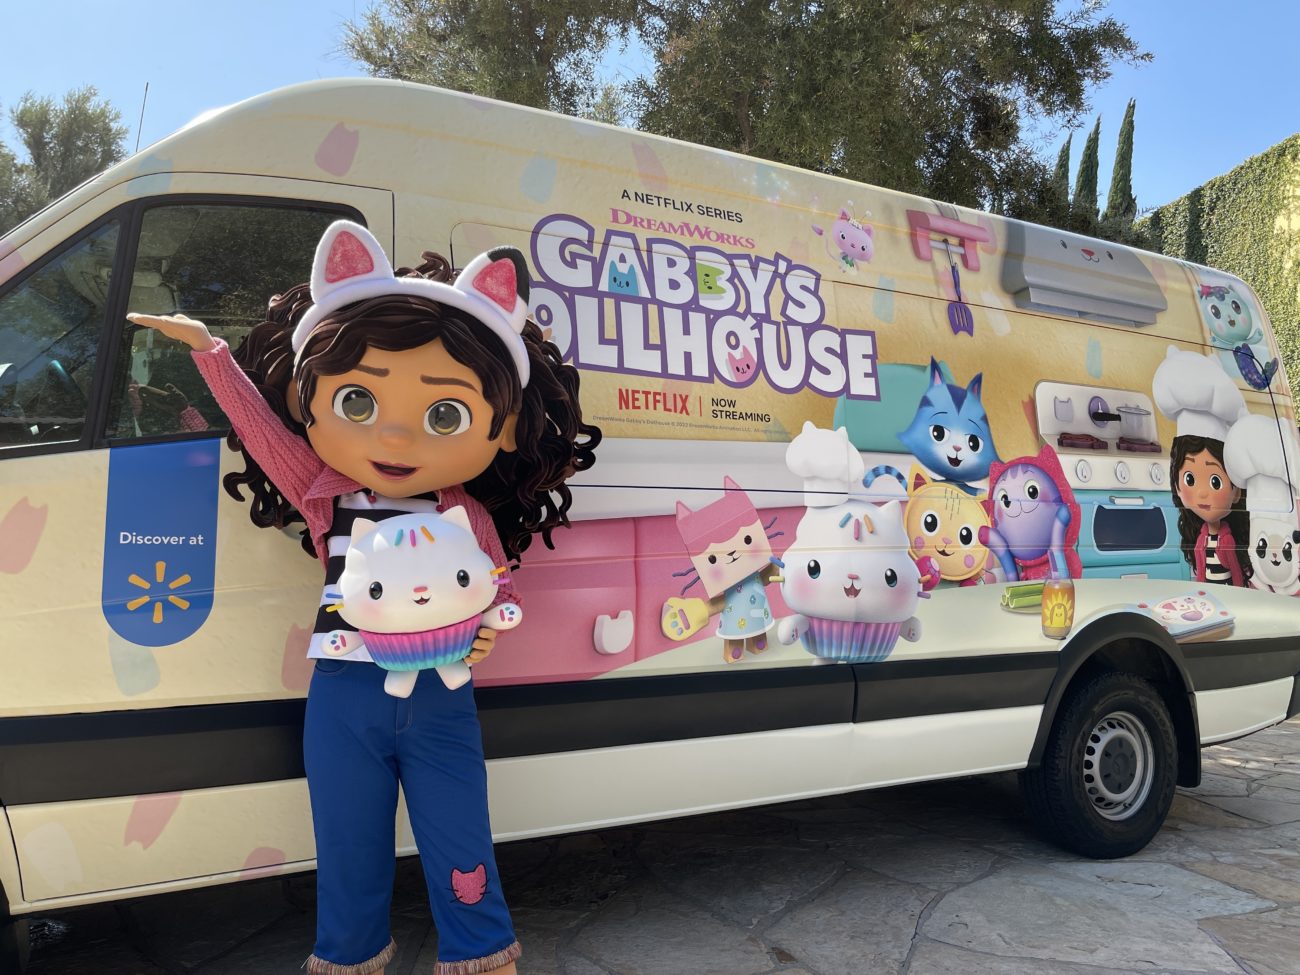 Don't Miss A Visit From Gabby's Dollhouse At A Store Near You - Main Line  Parent